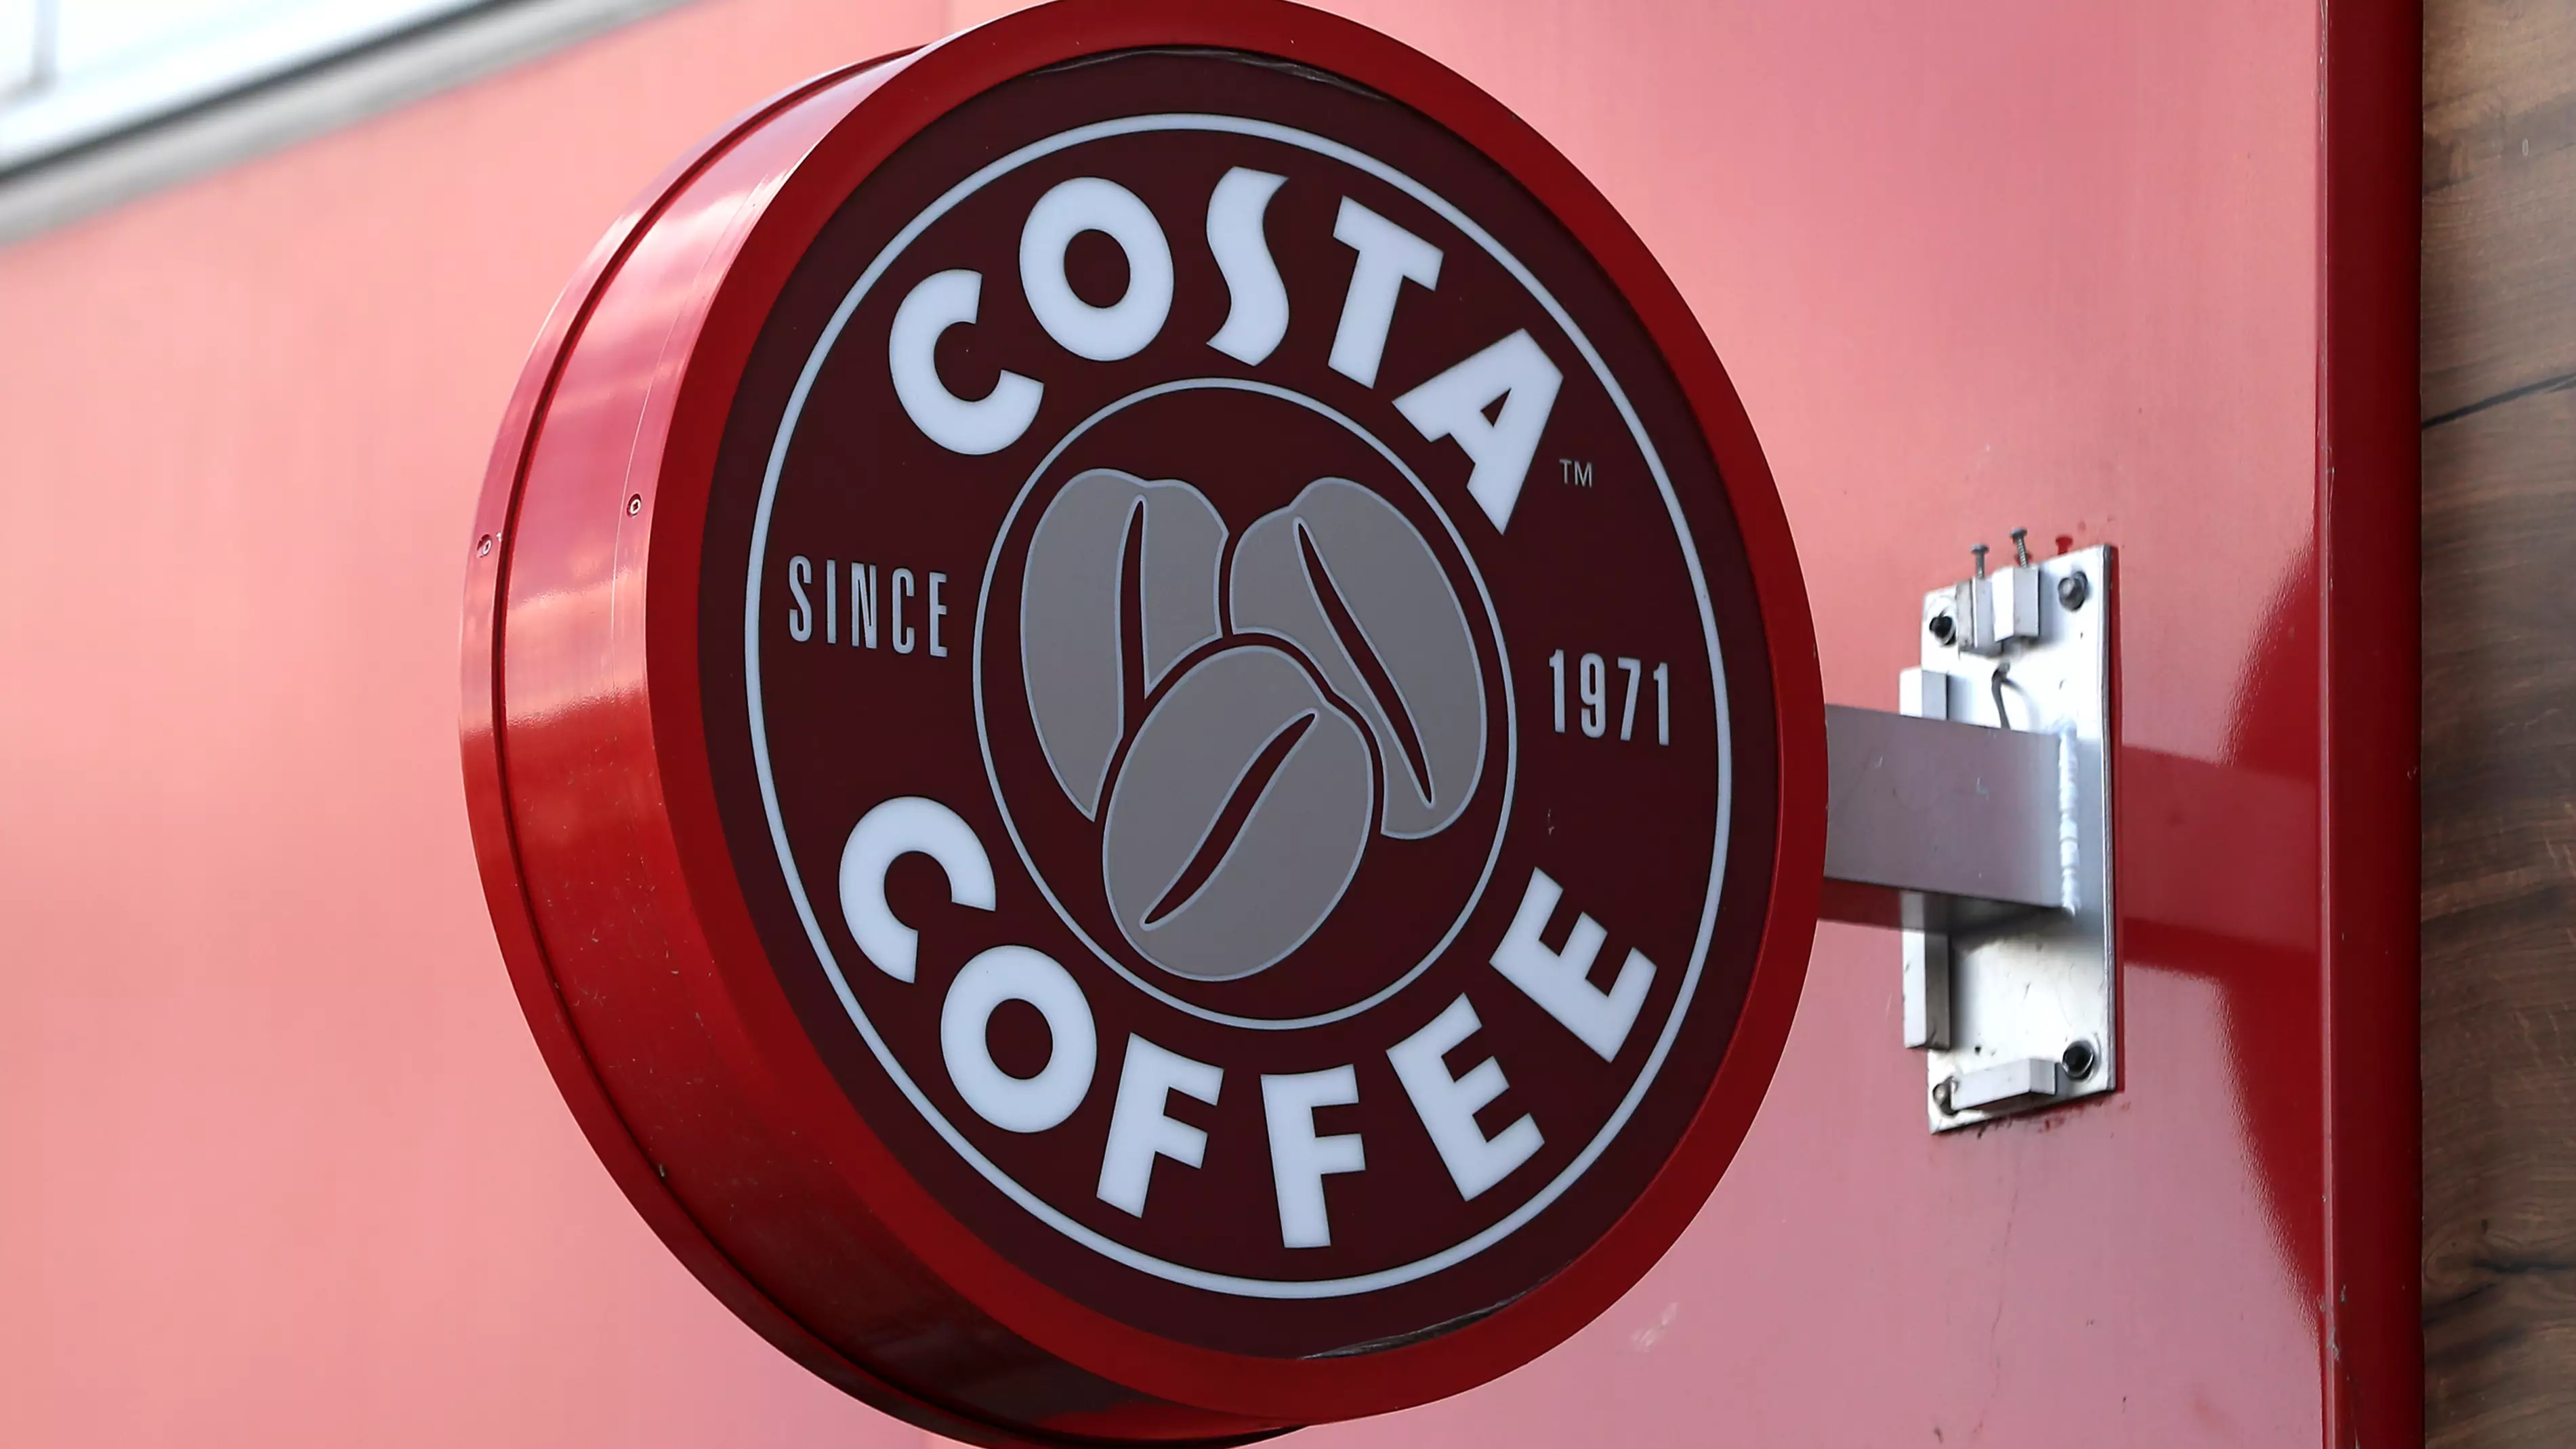 Costa Express Machines Are Giving Away Free Coffees For Everyone Next Tuesday